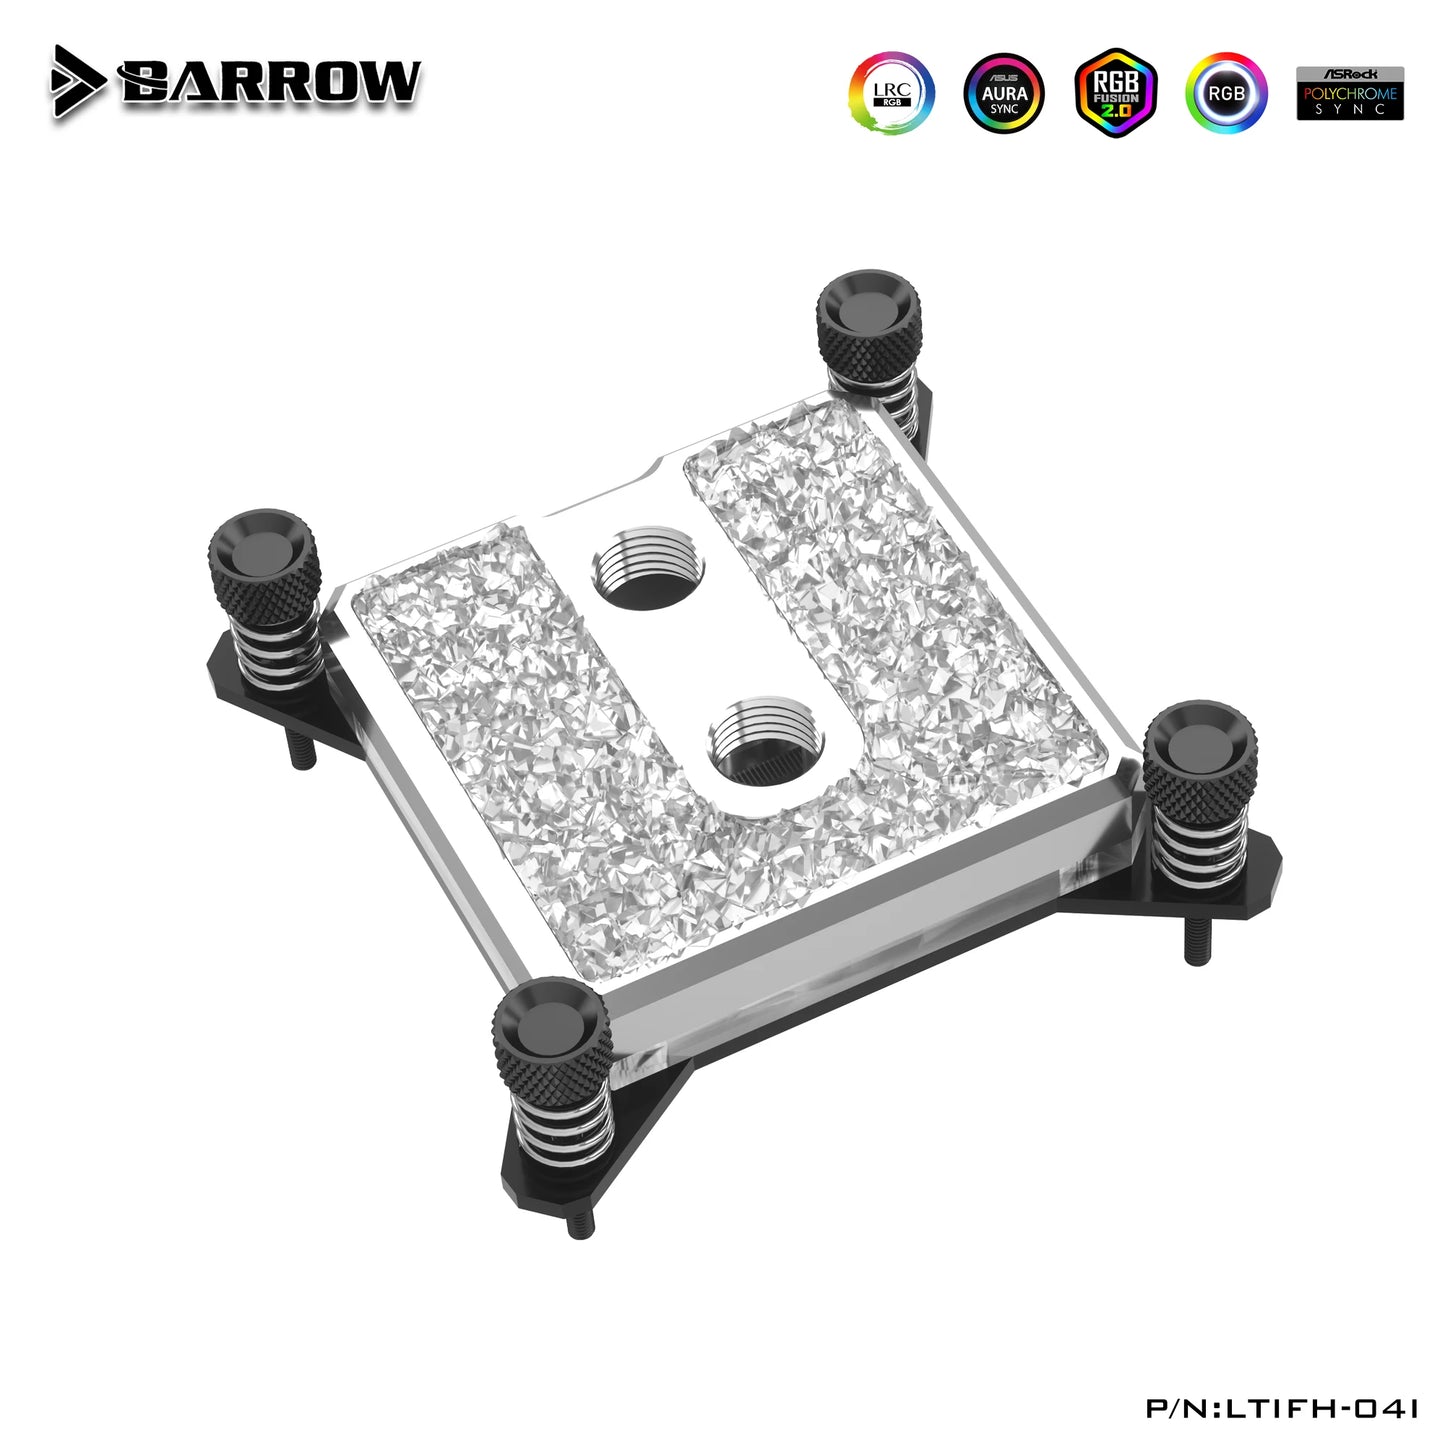 Barrow CPU Block For Intel and AMD Platform Icicle Series Acrylic or Brass Top Optional LRC 2.0 5v 3pin Microwaterway Cpu Cooler, LTIFH-04I LTIFHA-04